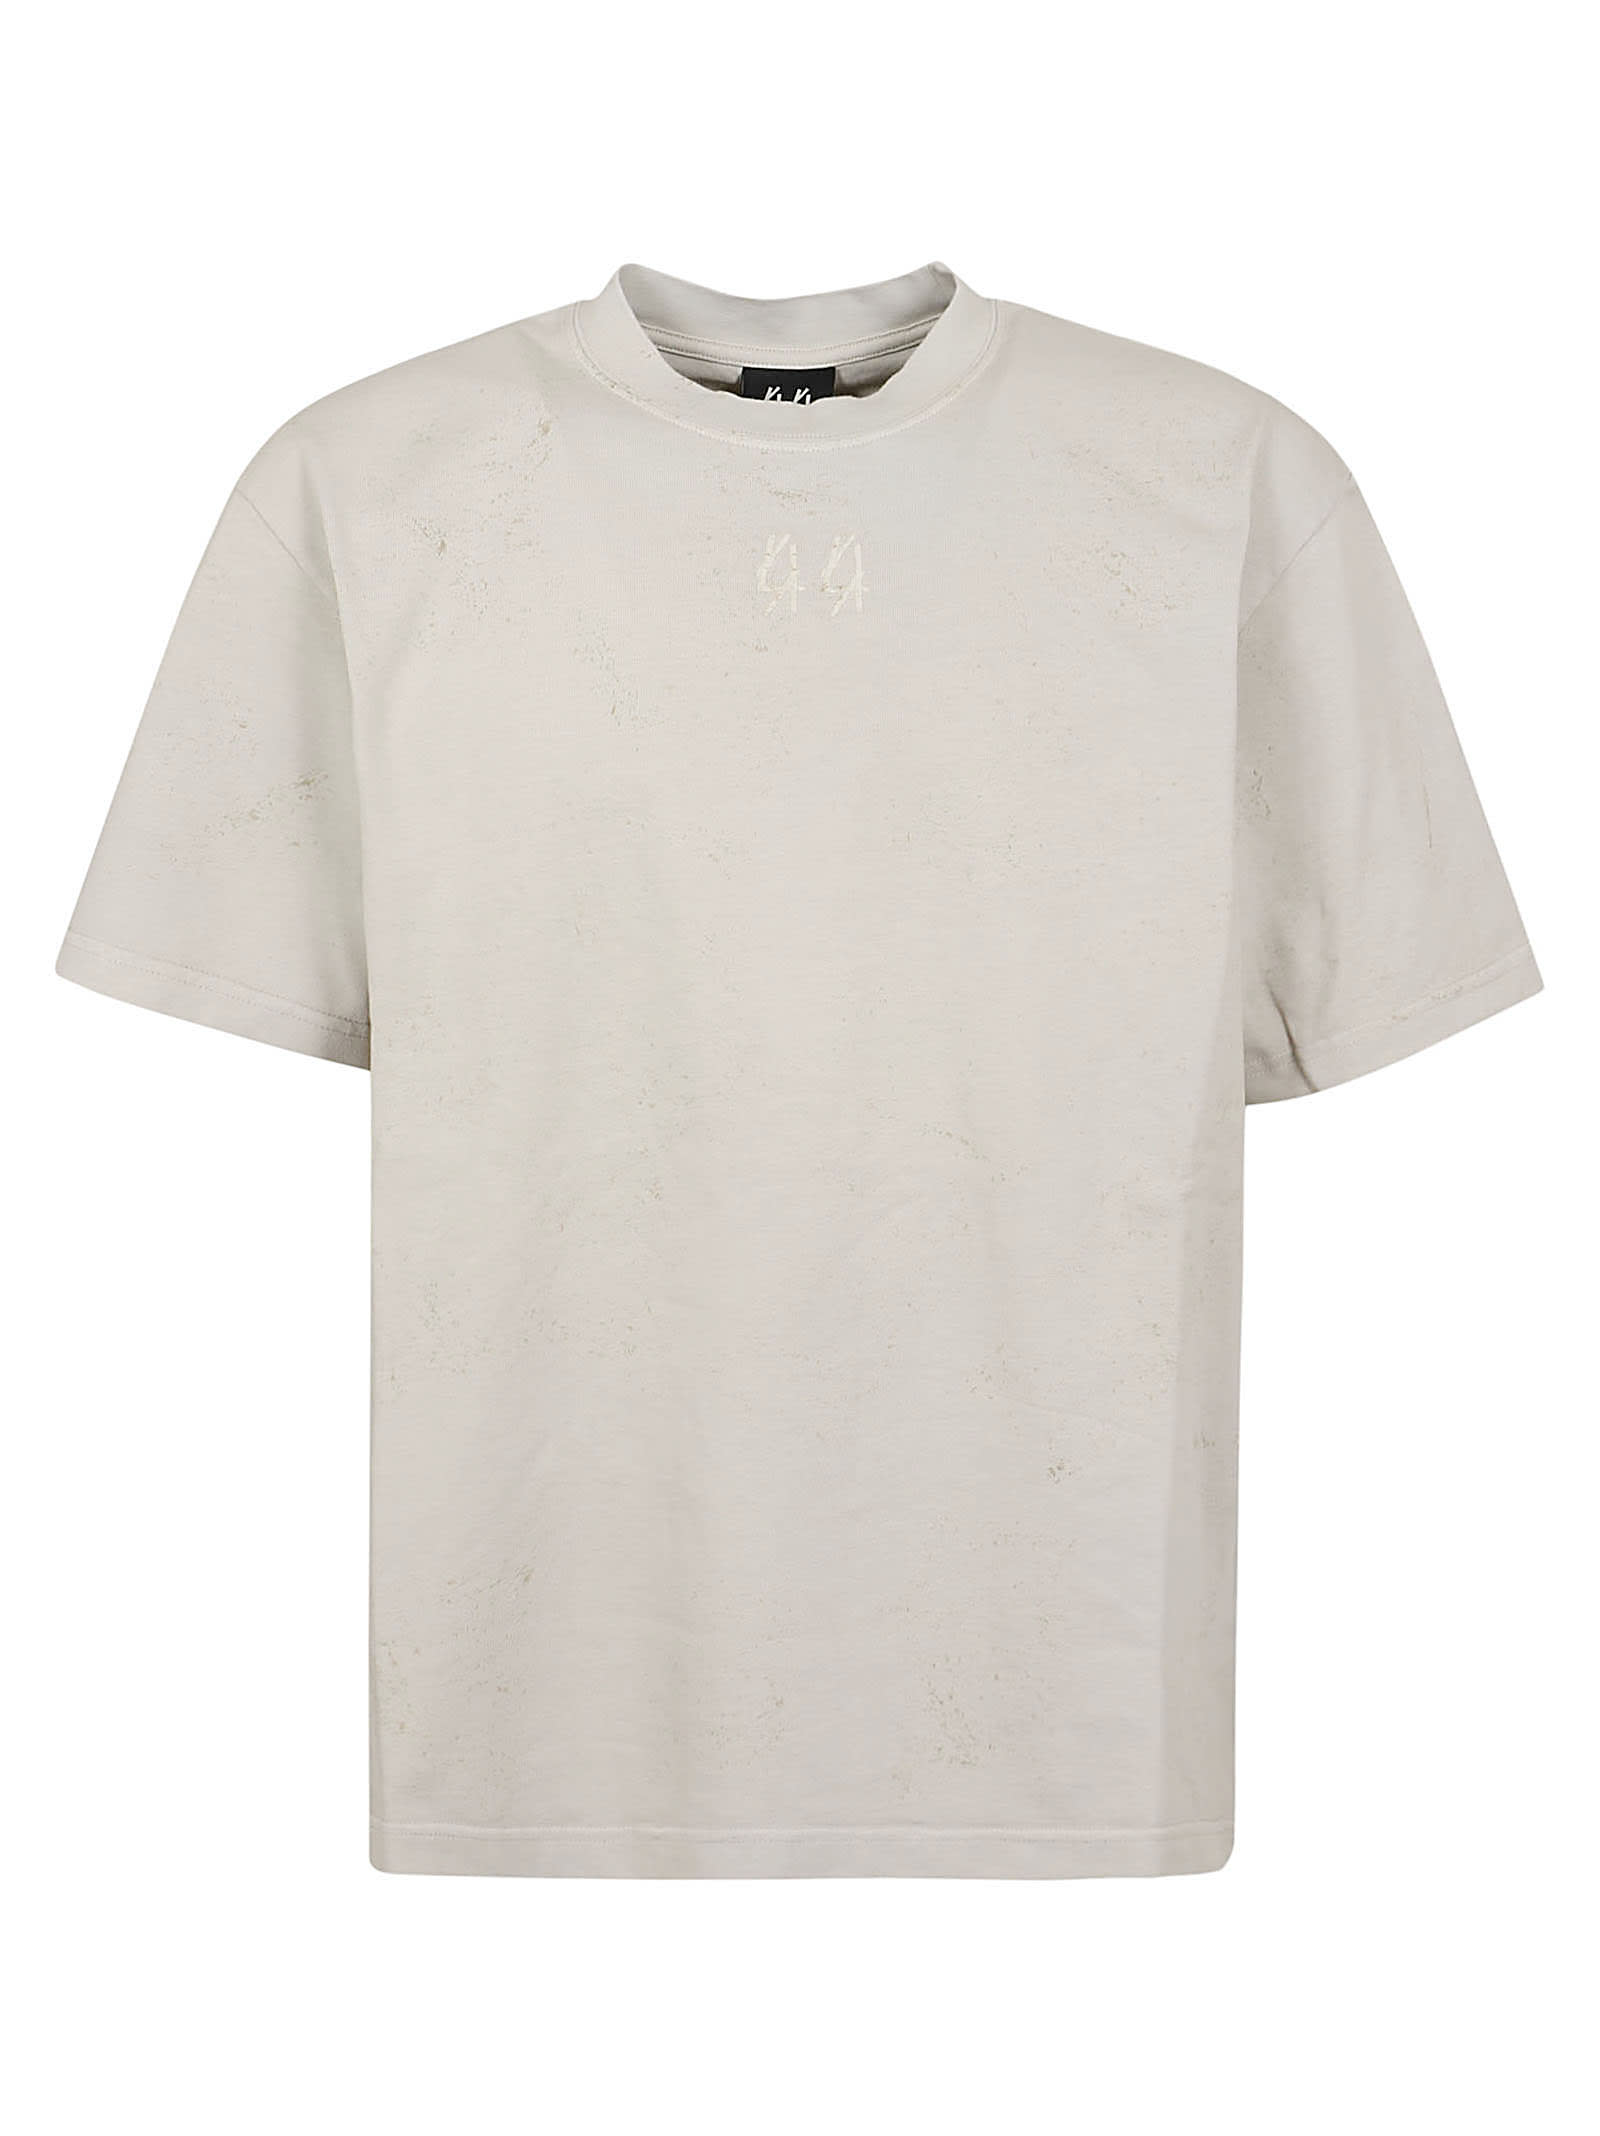 44 Label Group Trip Tee In Dirty White Gyps